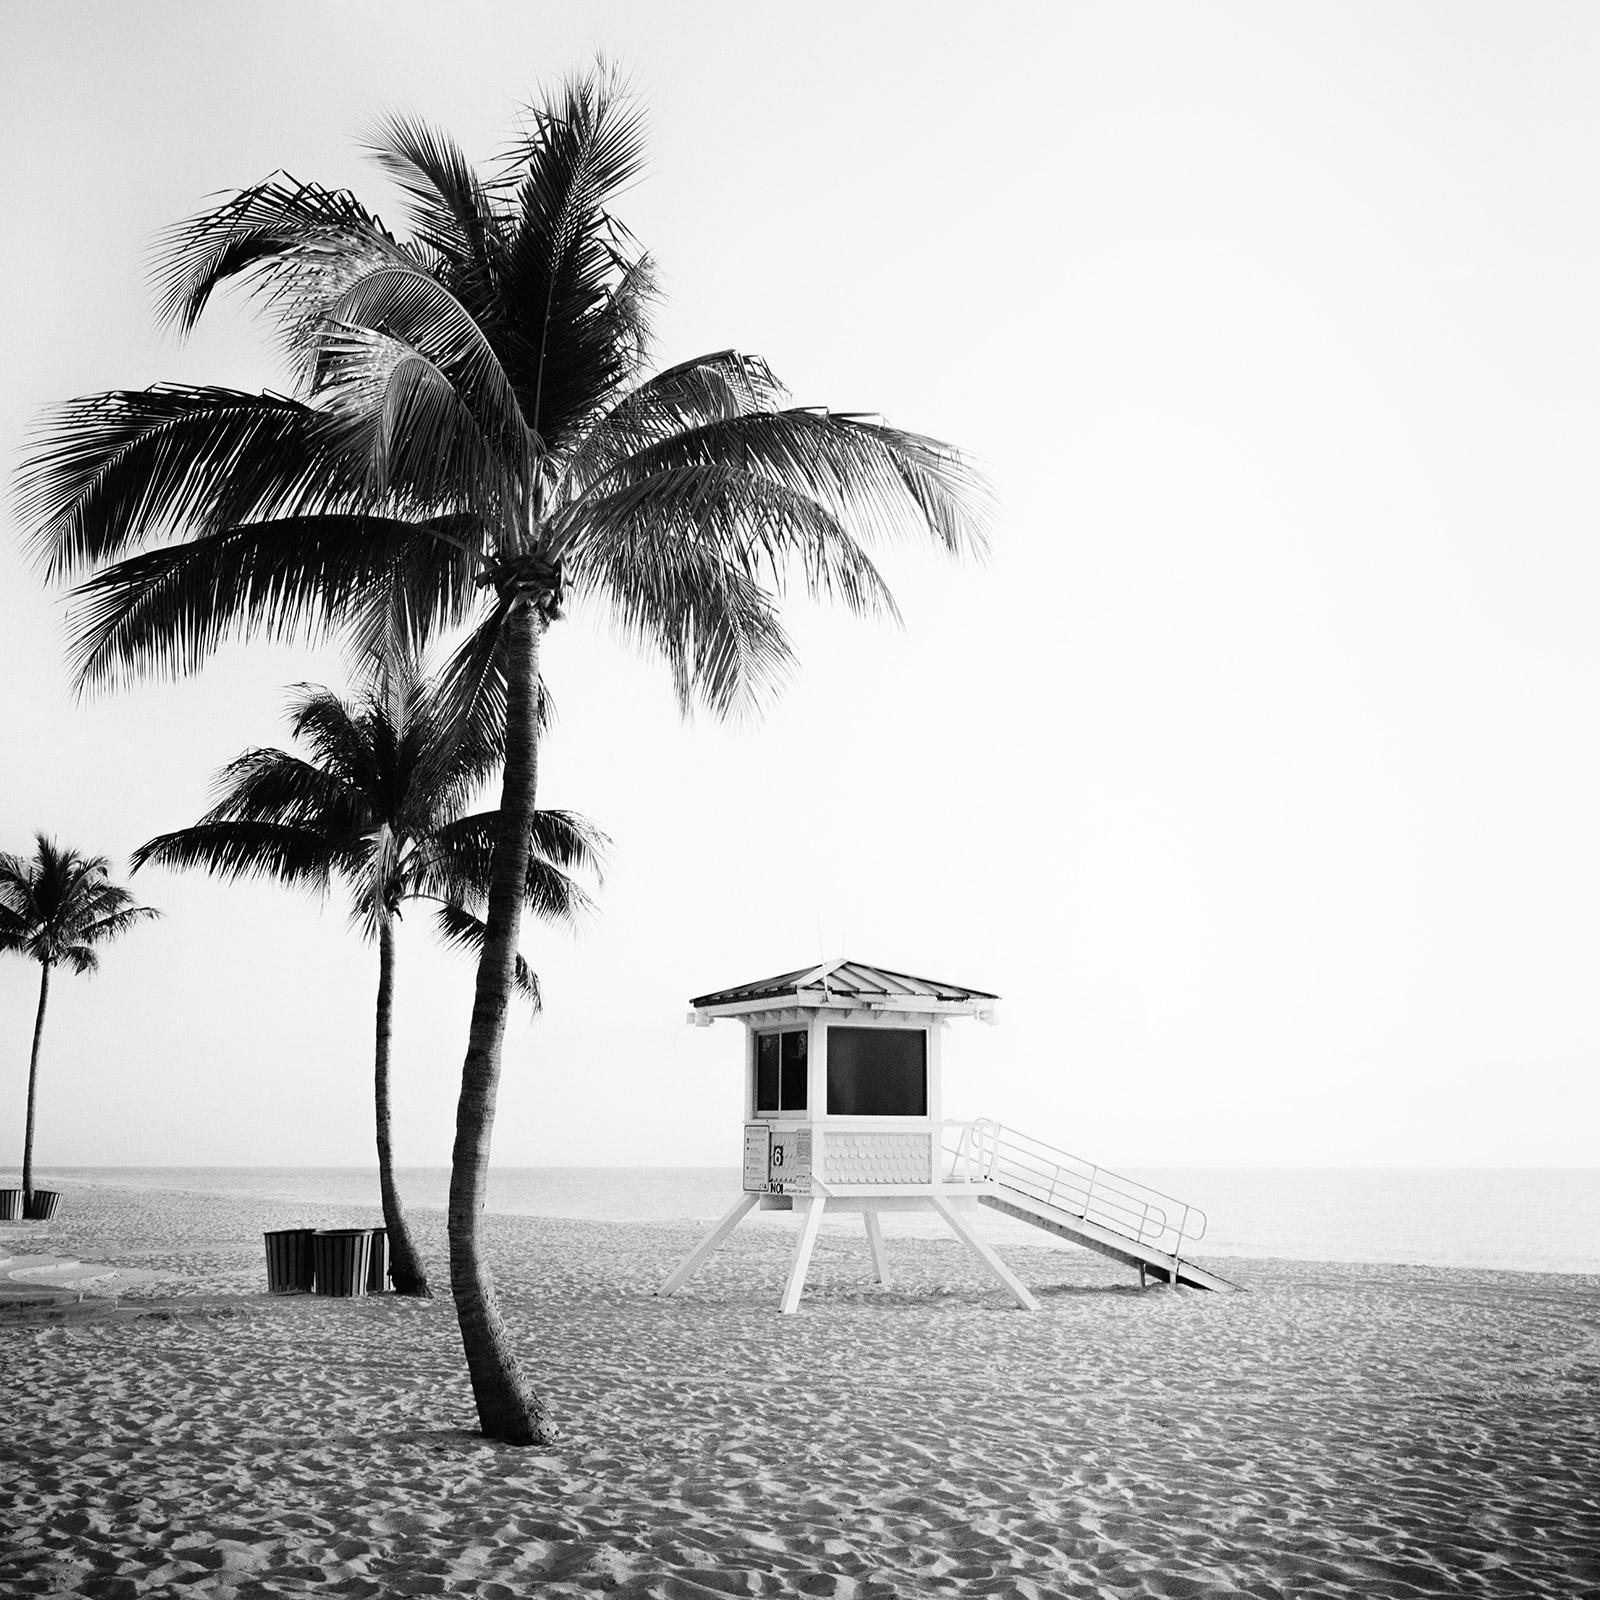 Fort Lauderdale Beach, Florida, USA, black and white art landscape photography